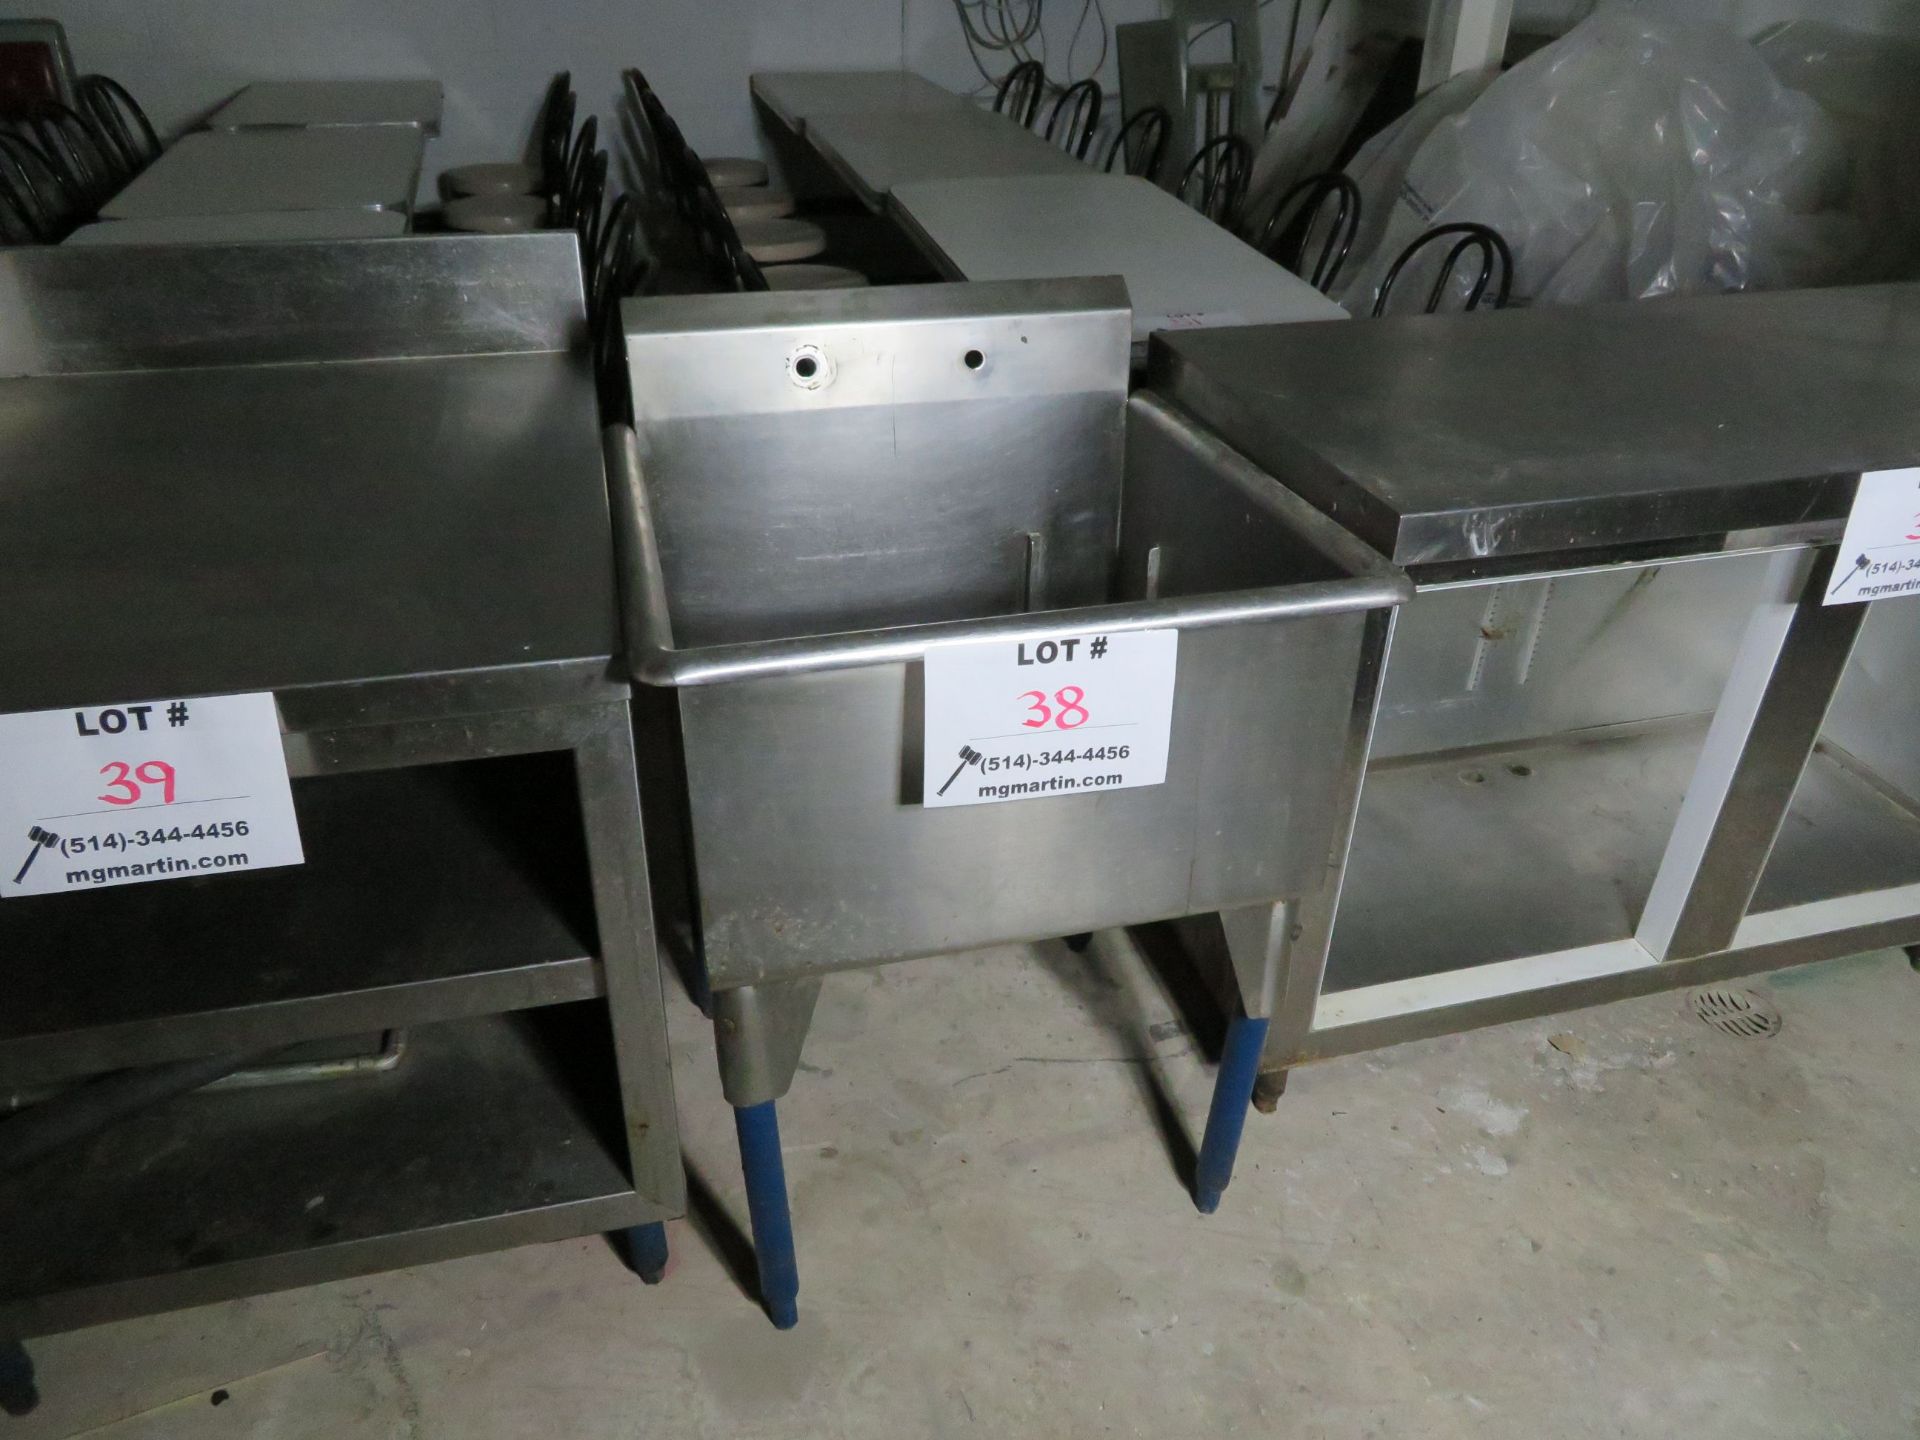 Stainless steel sink approx. 27"w x 27"d x 35"h